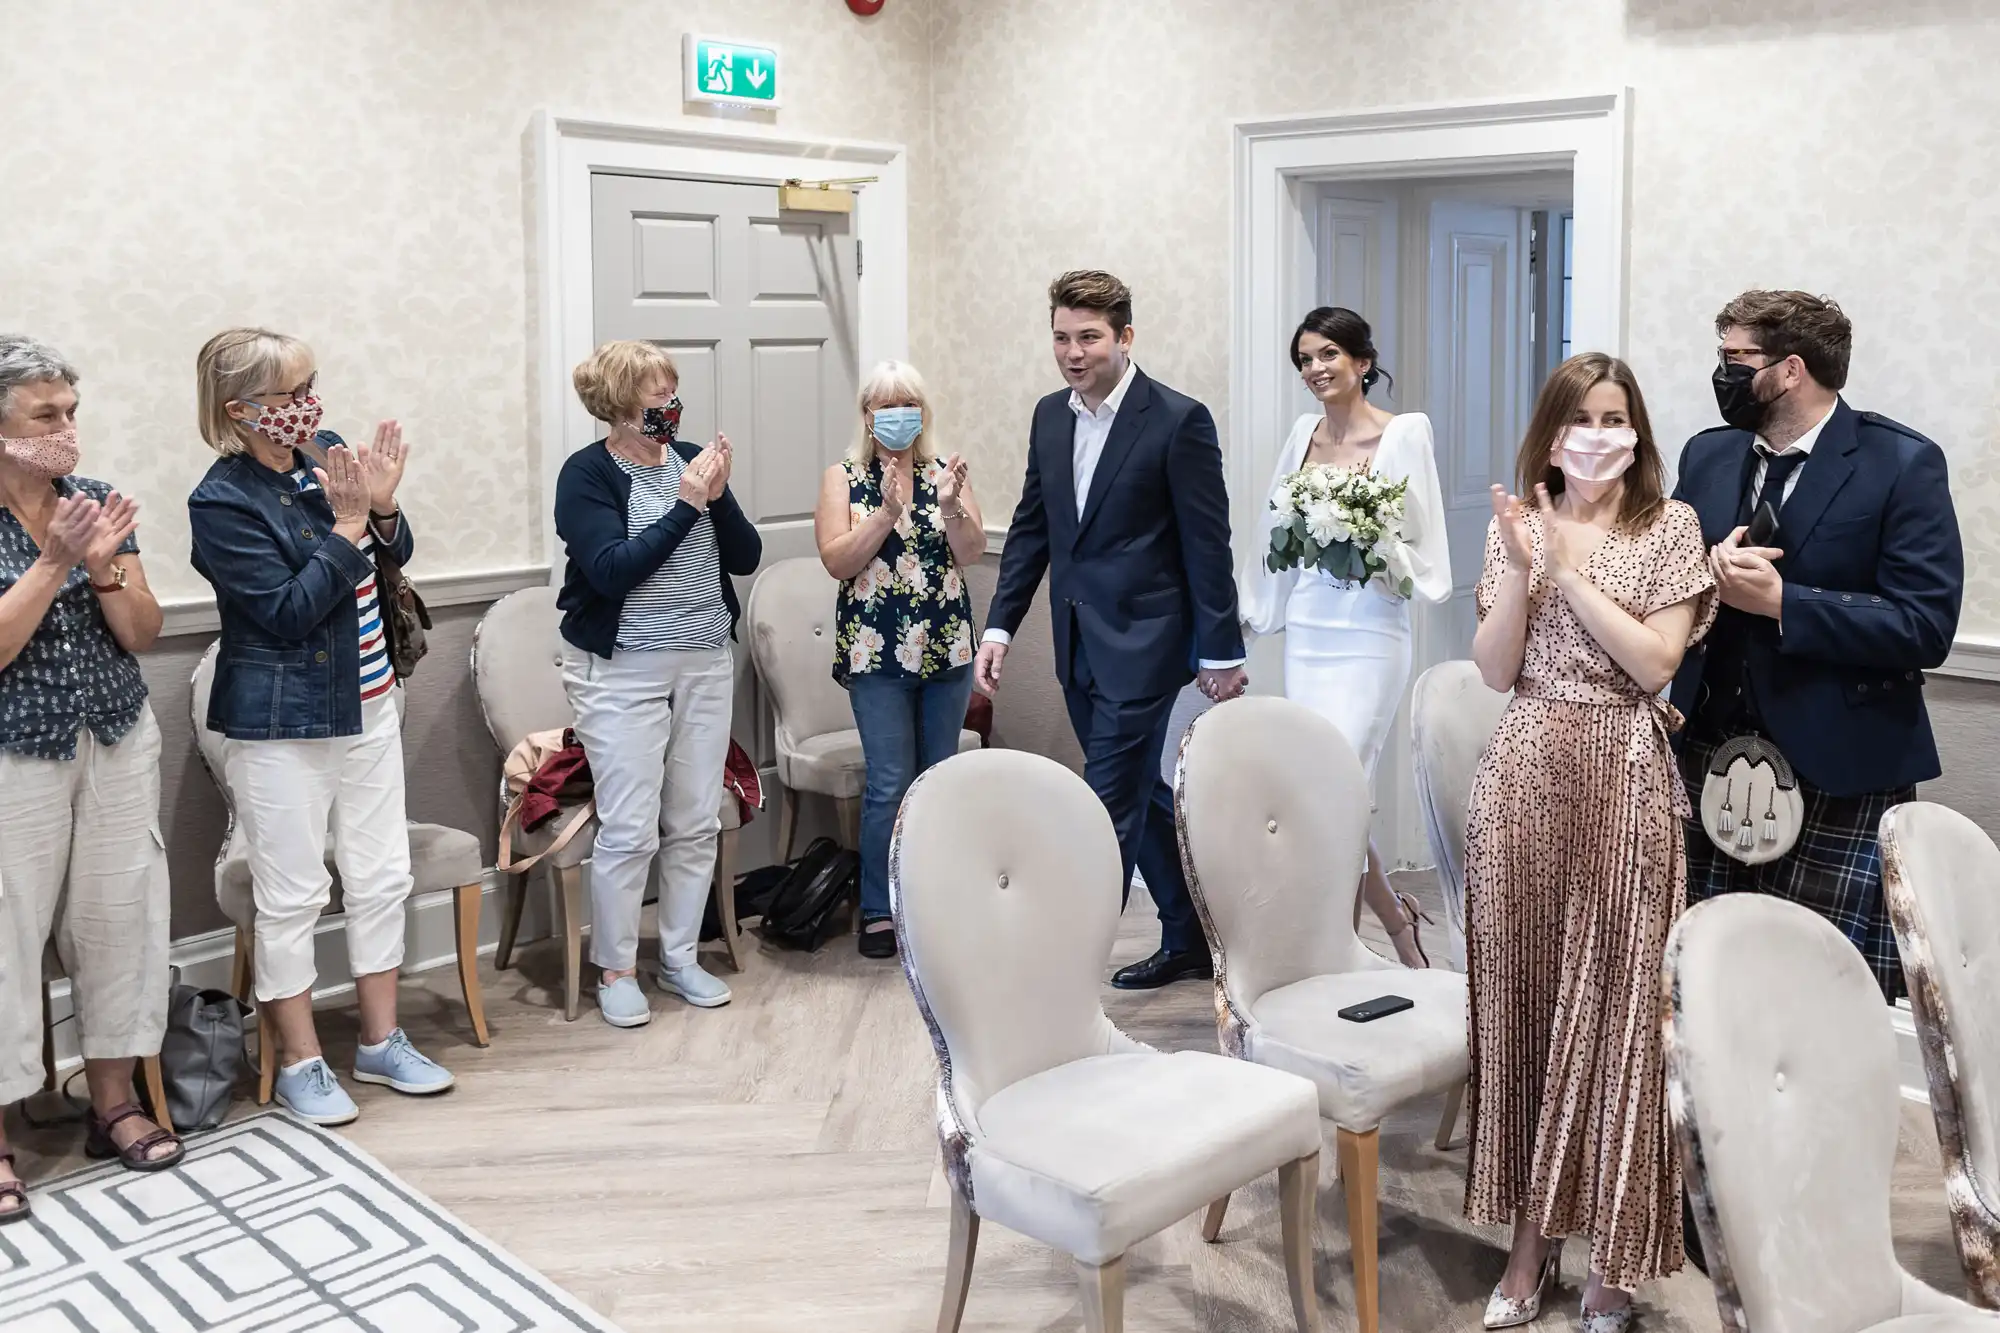 A newlywed couple walks through a small room receiving applause from guests wearing masks; the setting is casual and intimate.